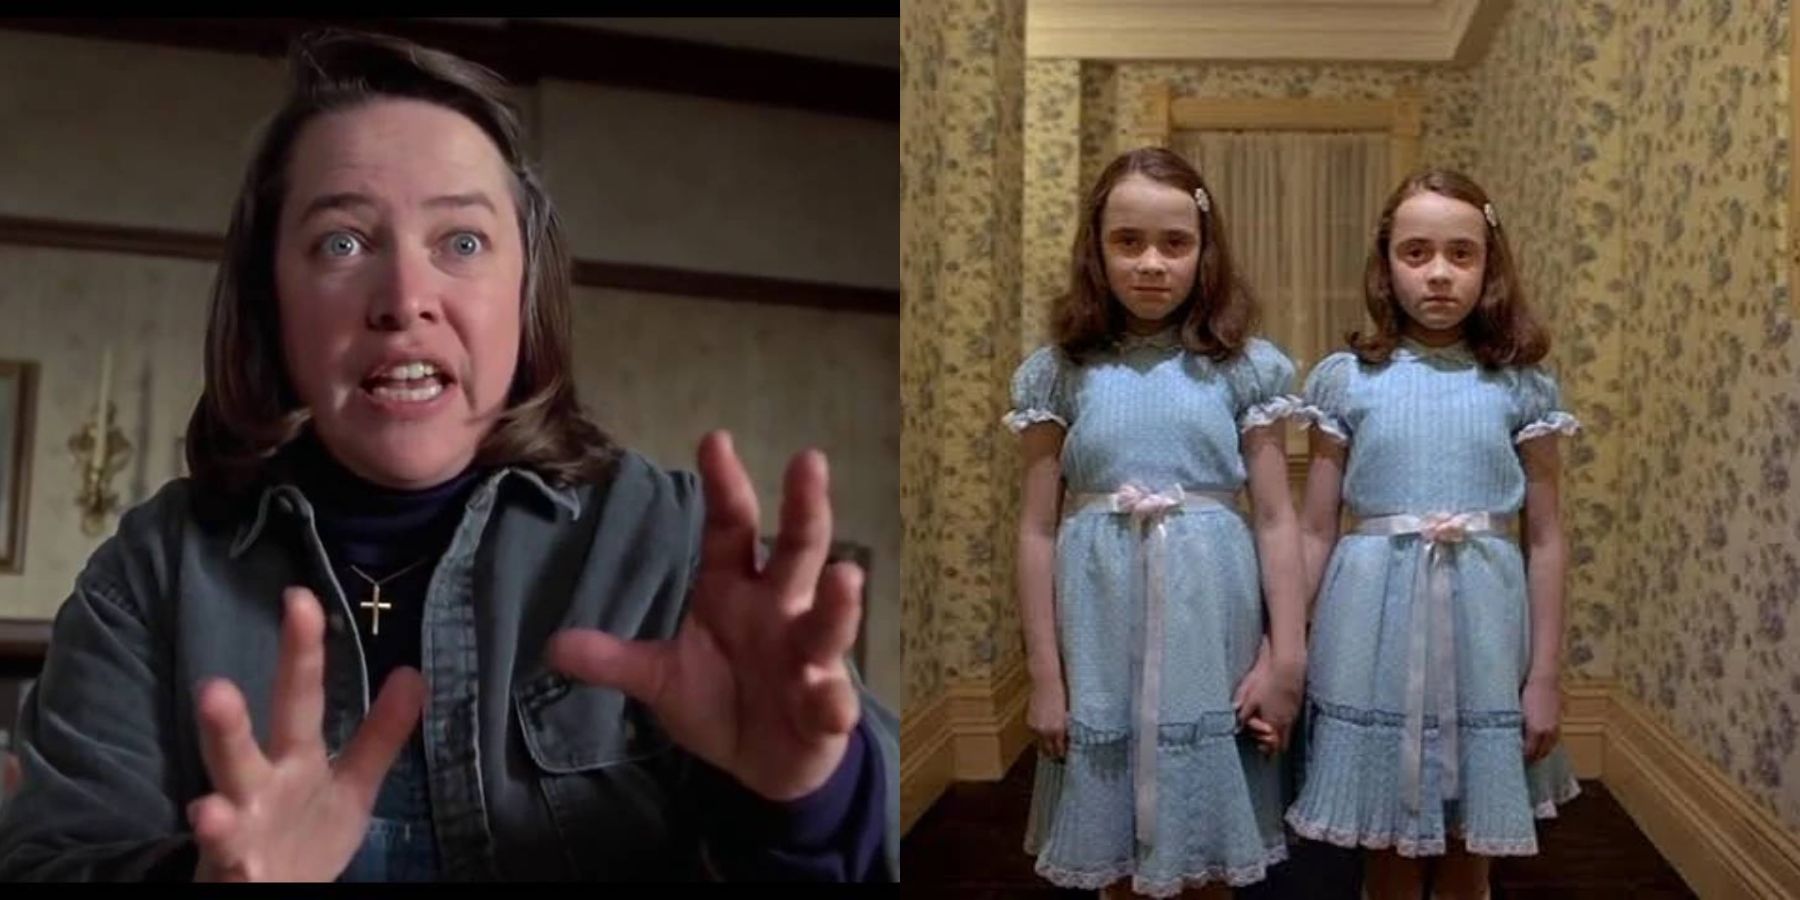 Split image of Annie Wilkes (Kathy Bates) in Misery and the twins in The Shining